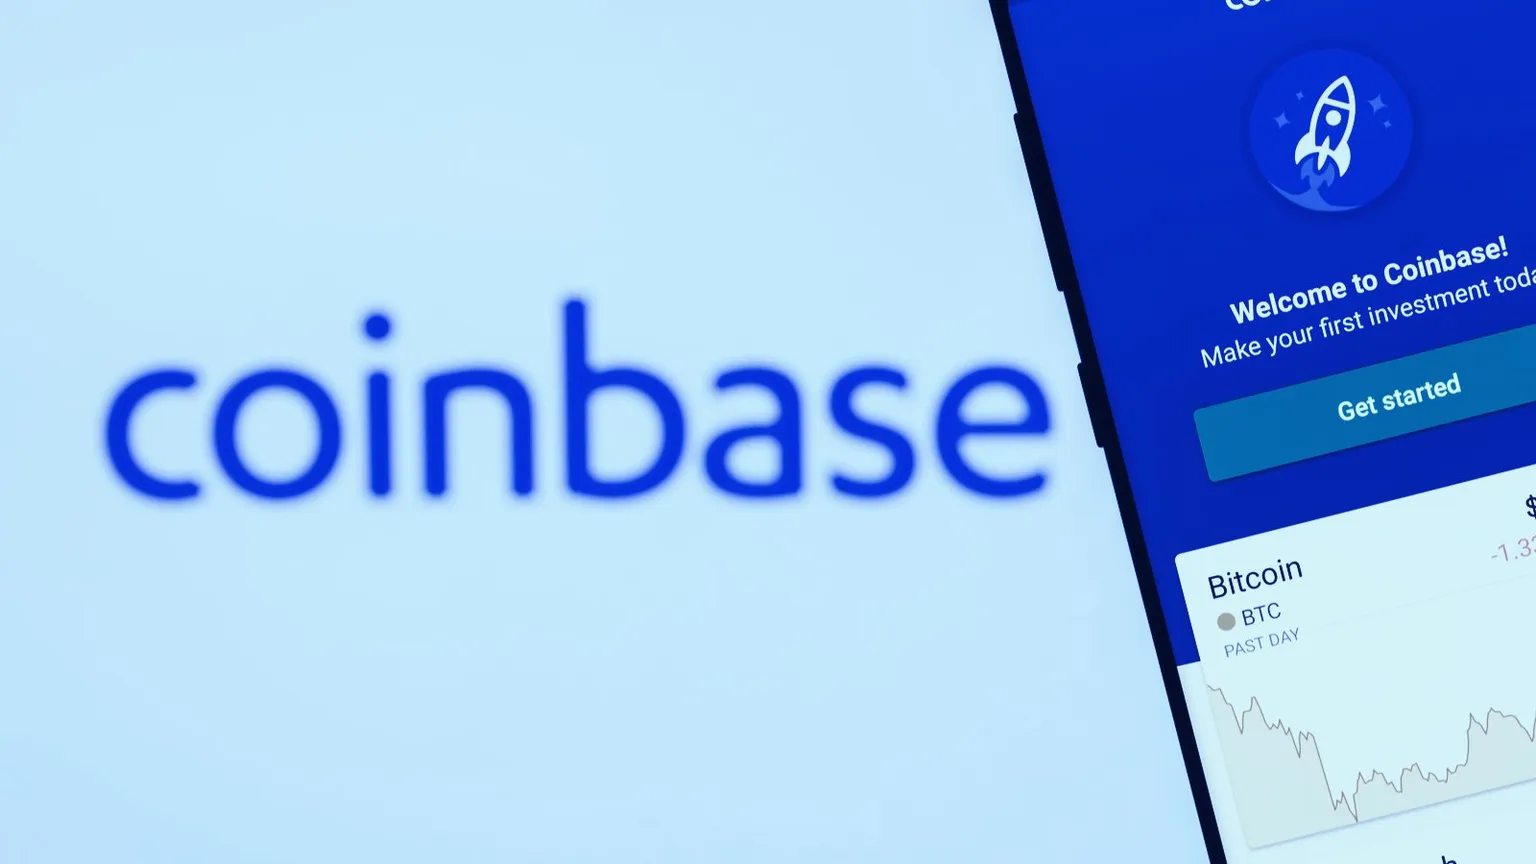 Coinbase is the leading crypto exchange in the US. Image: Shutterstock